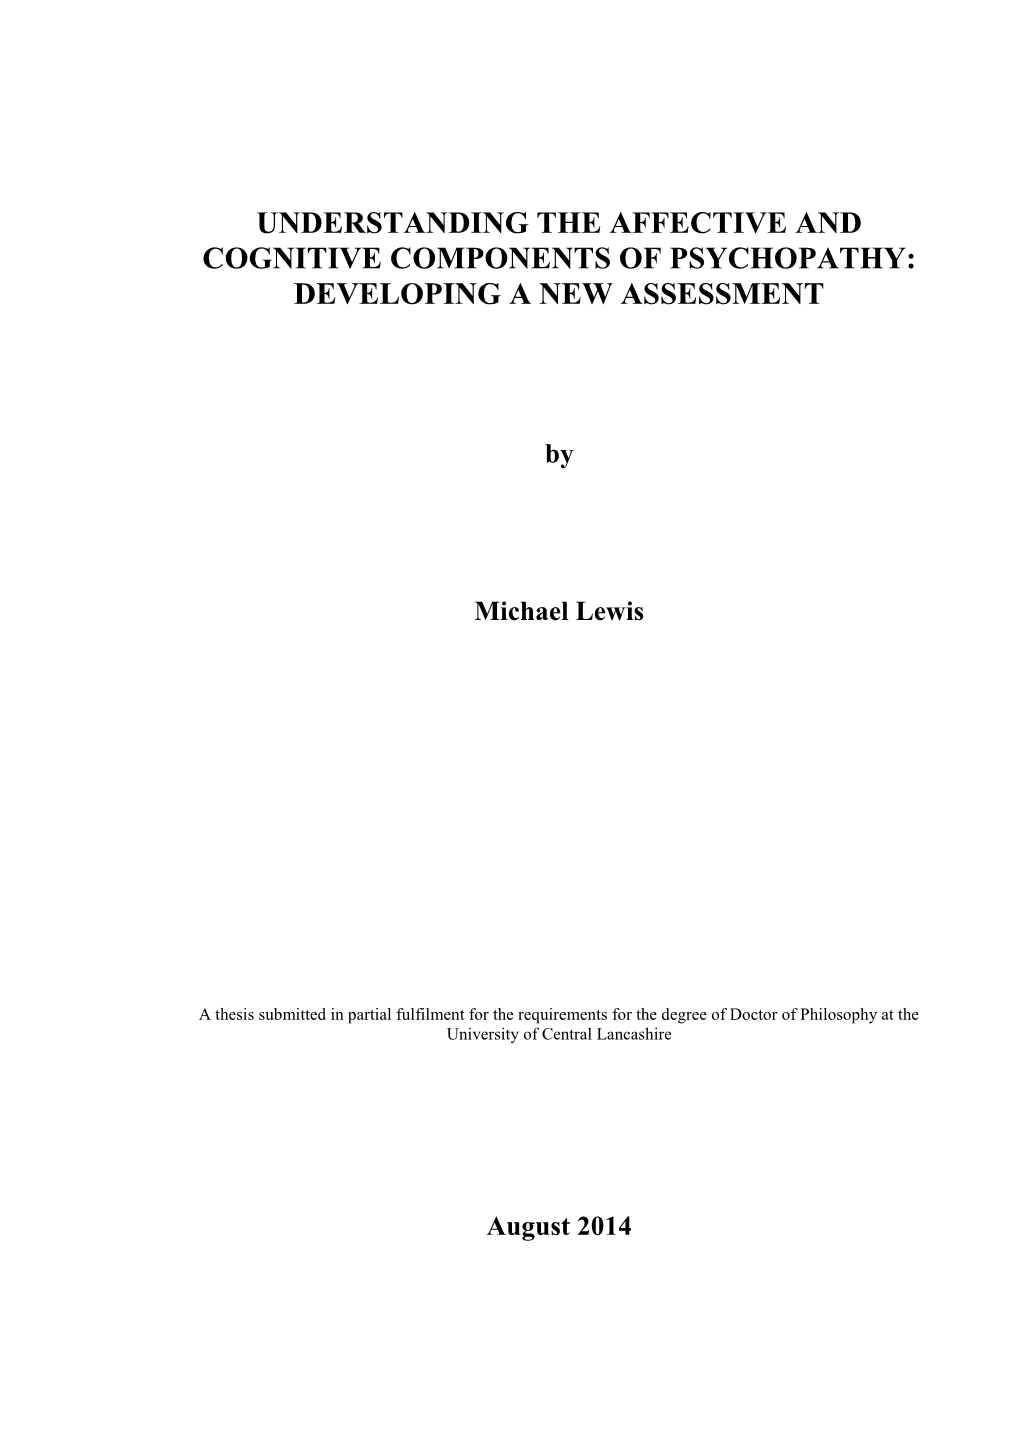 Understanding the Affective and Cognitive Components of Psychopathy: Developing a New Assessment